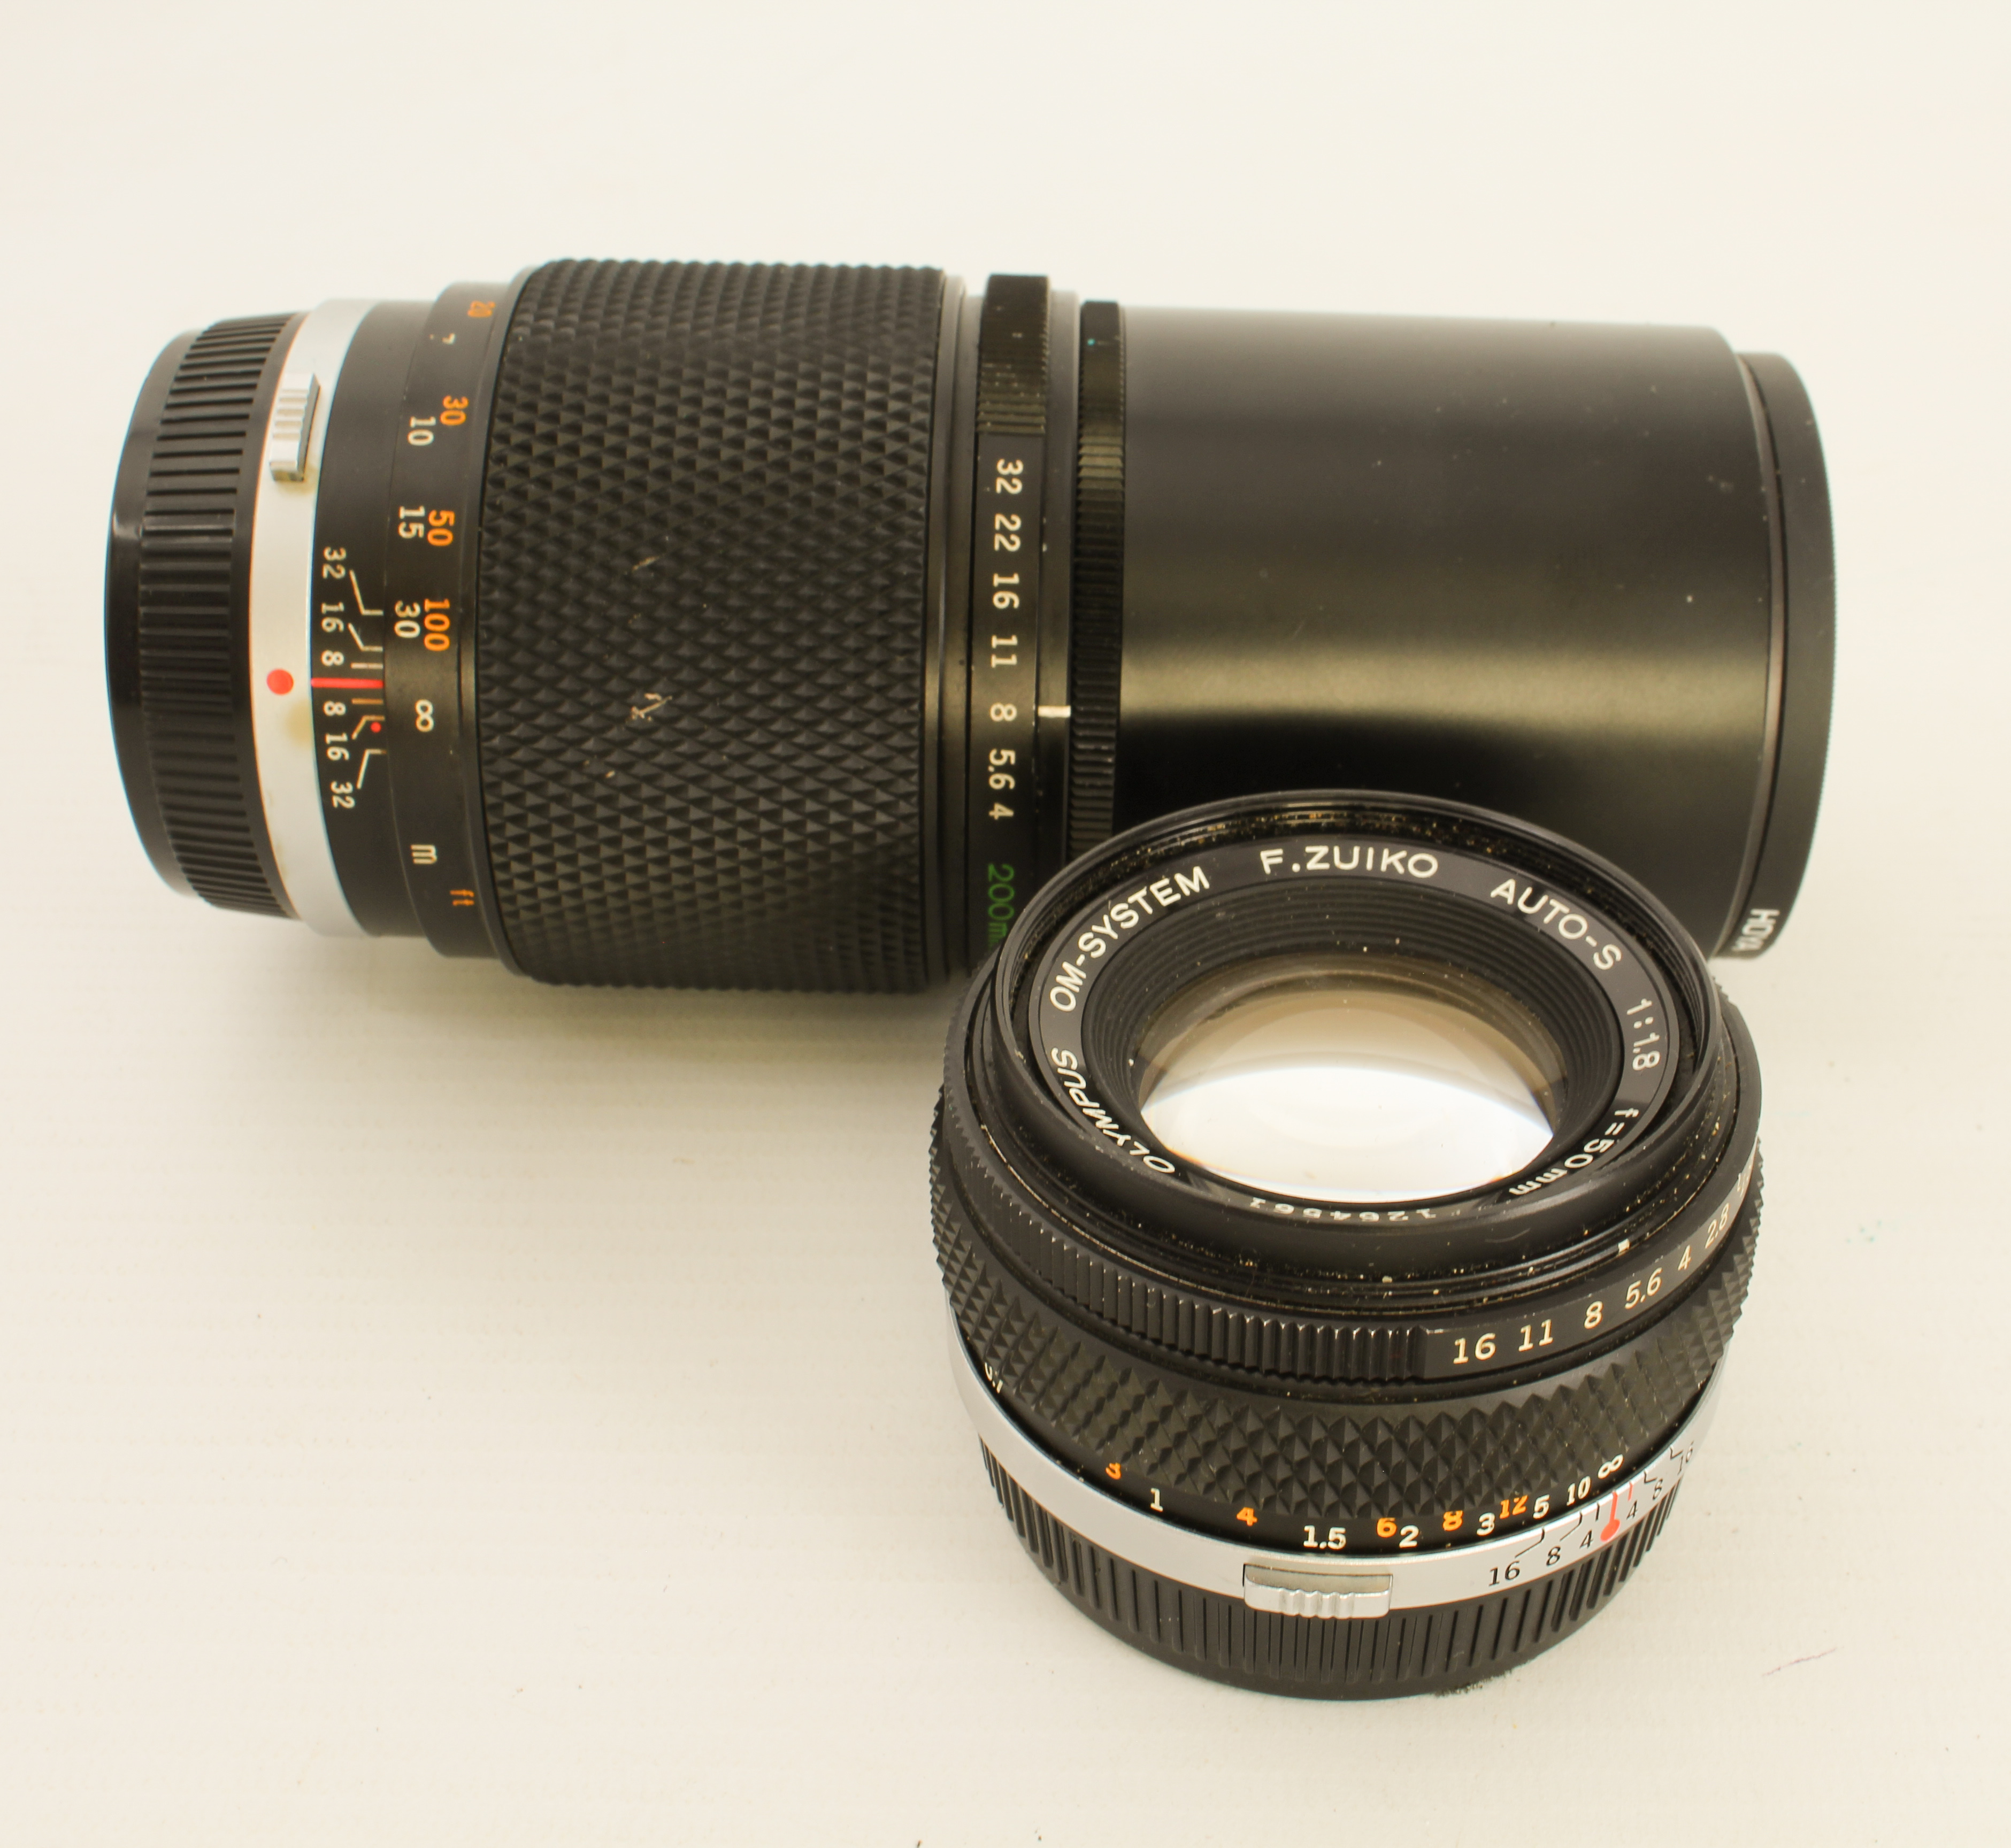 An Olympus OM-1 35mm camera, lenses and accessories - the OM-1N body with an Olympus OM-System G. - Image 4 of 4